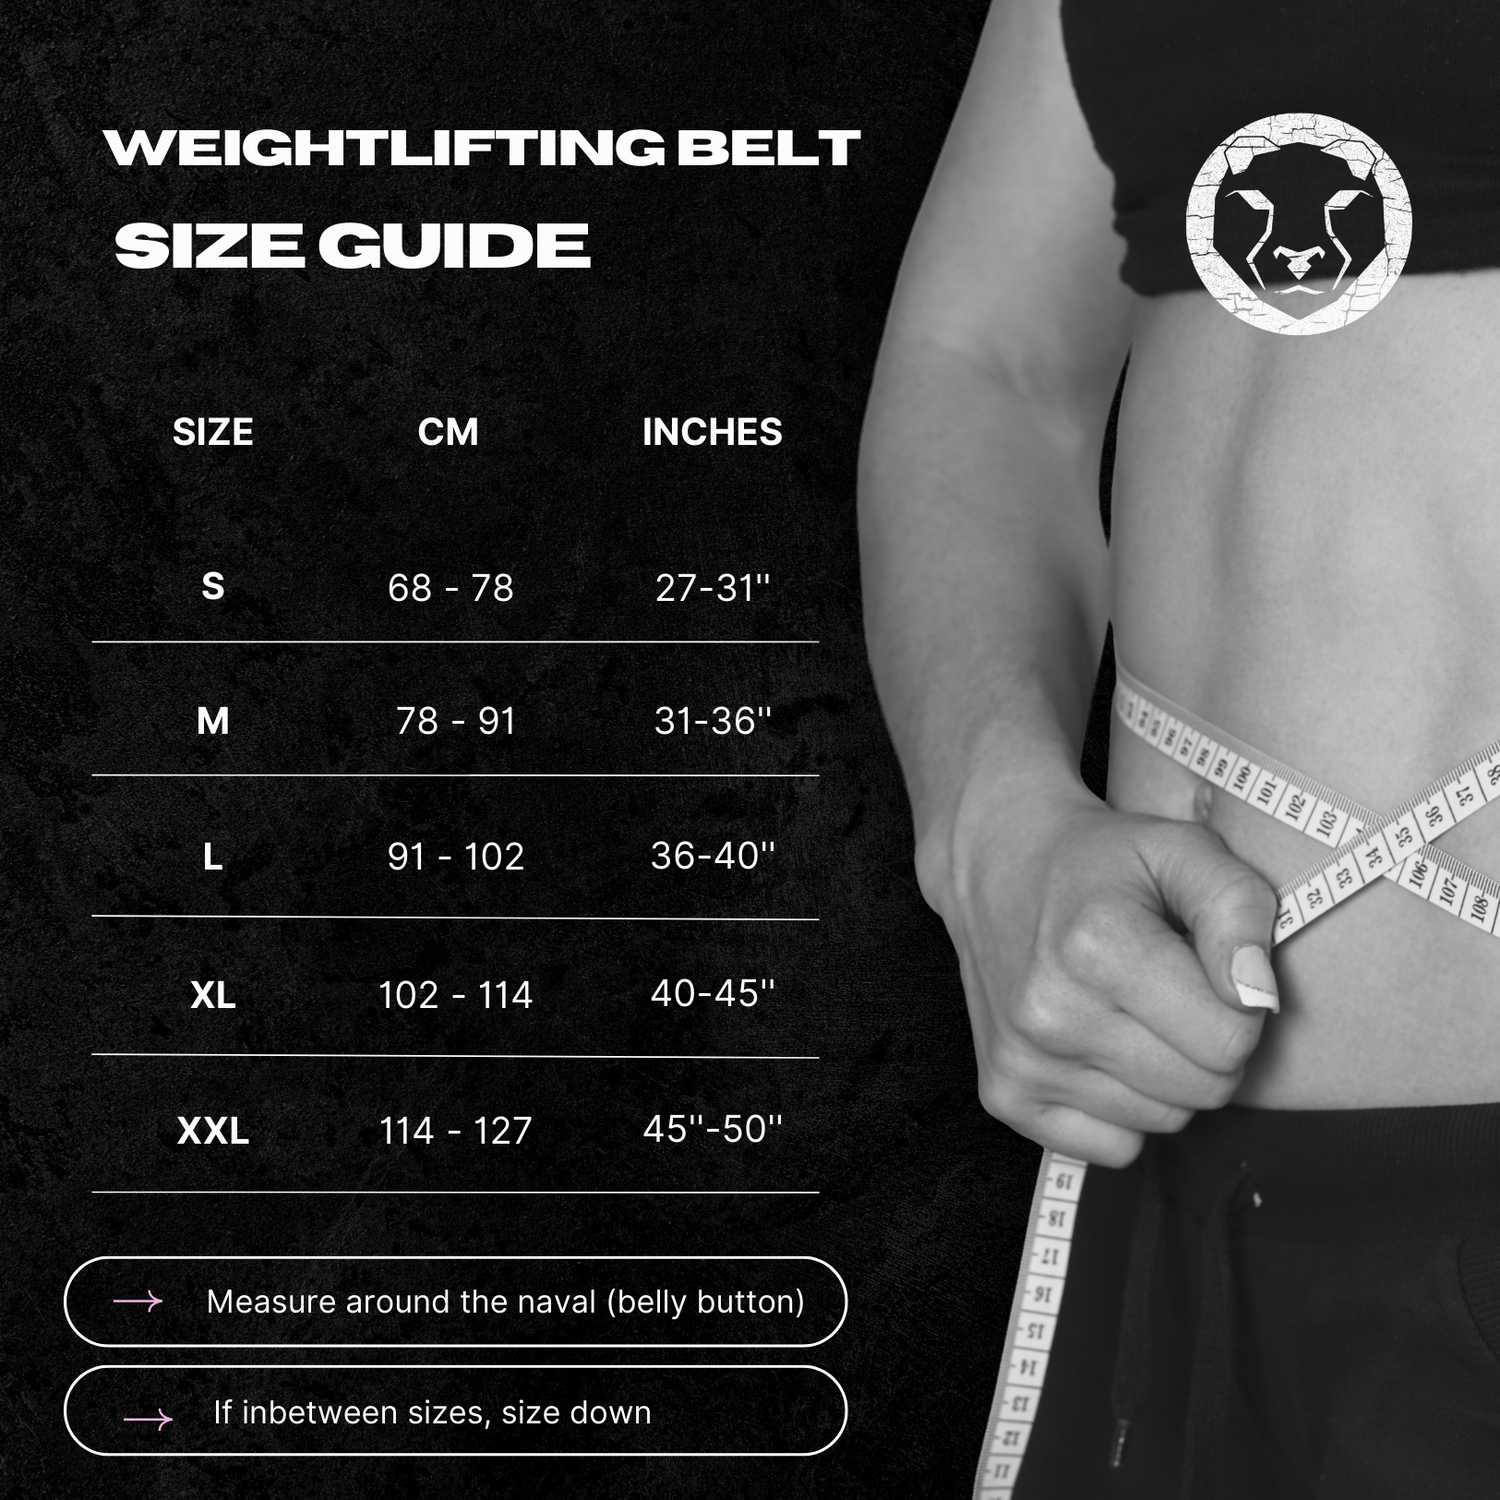 Durable Mammal Strength 4-inch Nylon Weightlifting Belt for secure core support during Crossfit and heavy lifts